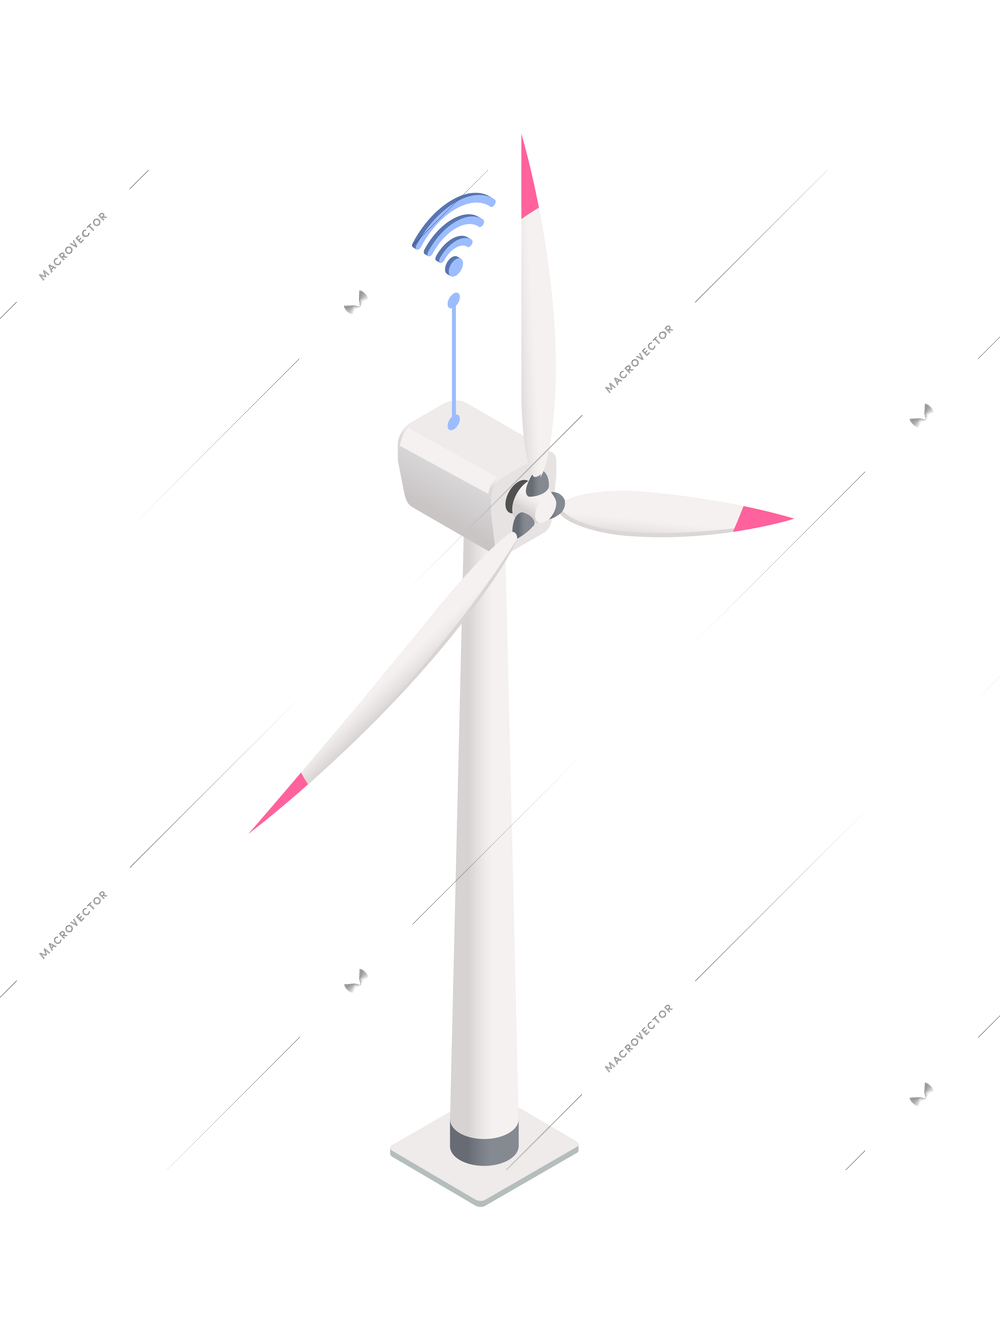 Smart industry isometric icon with remote controlled windmill 3d vector illustration